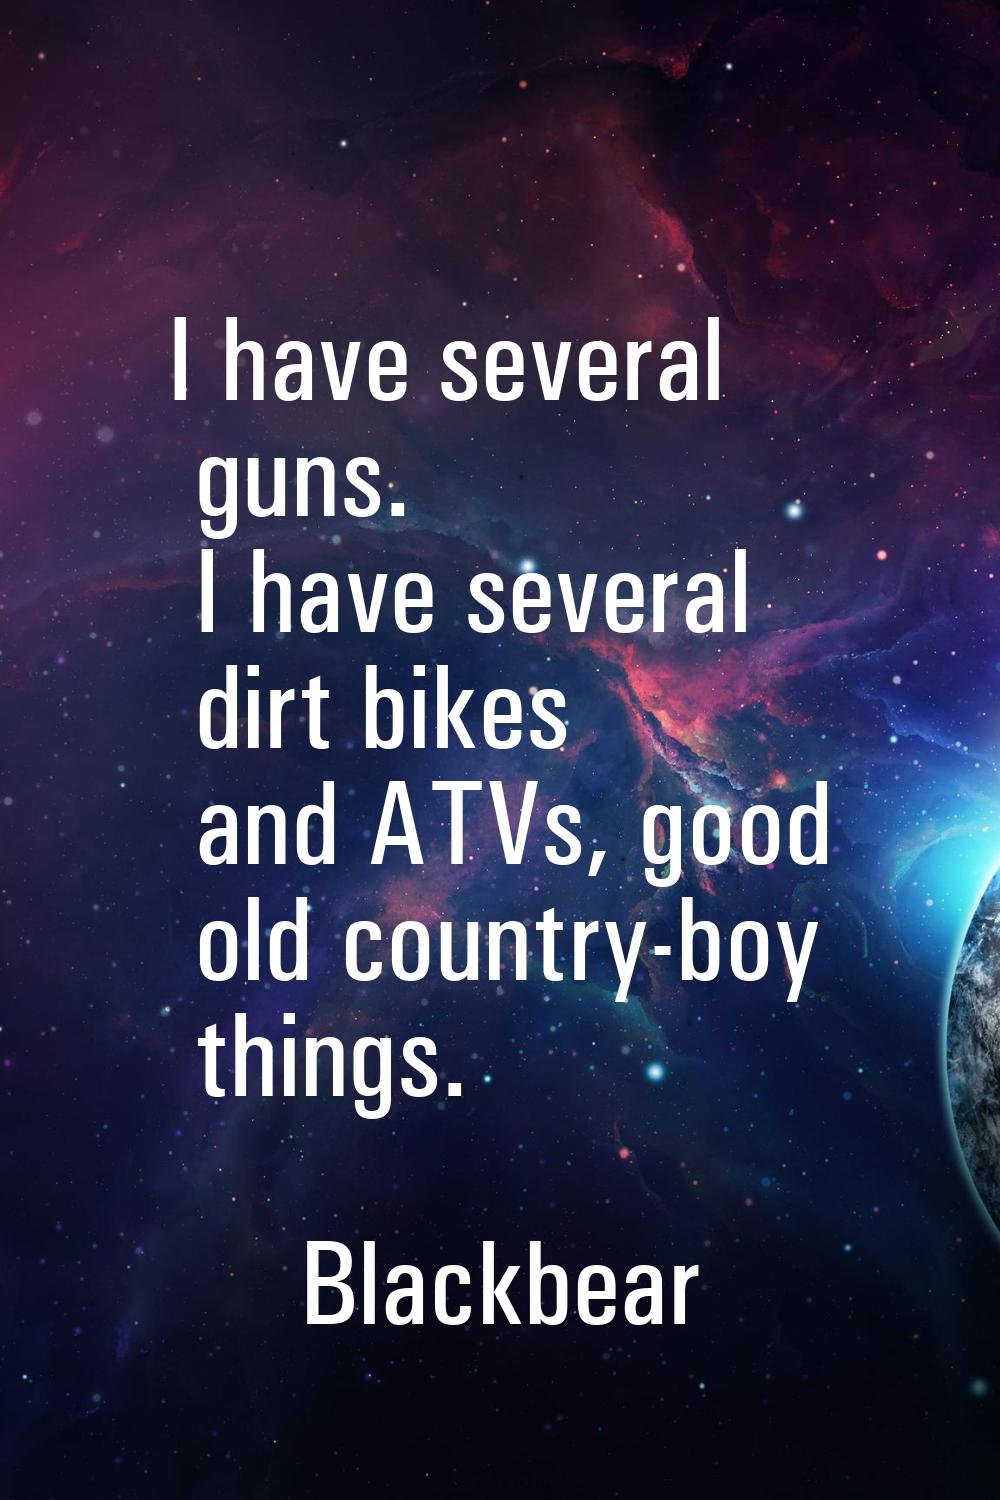 I have several guns. I have several dirt bikes and ATVs, good old country-boy things.